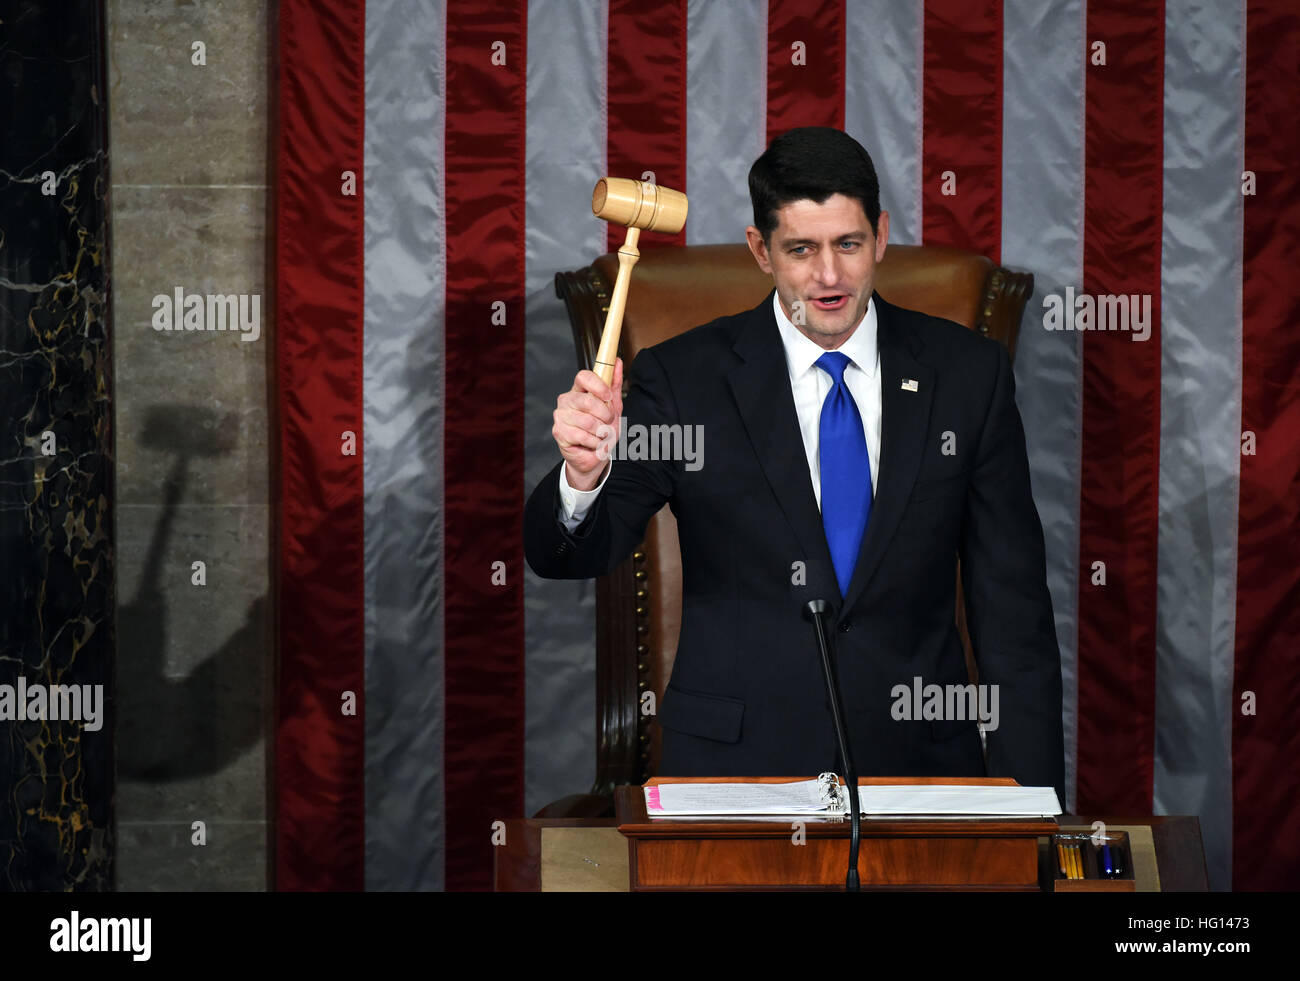 Washington, USA. 3rd Jan, 2017. Paul Ryan raises the gavel after being re-elected as House Speaker during the opening of the 115th U.S. Congress on Capitol Hill in Washington, DC, the United States, on Jan. 3, 2017. The 115th U.S. Congress convenes on Tuesday with Republican Paul Ryan re-elected as House Speaker as expected while outgoing Vice President Joe Biden presides over the old Senate chamber for the last time. © Yin Bogu/Xinhua/Alamy Live News Stock Photo